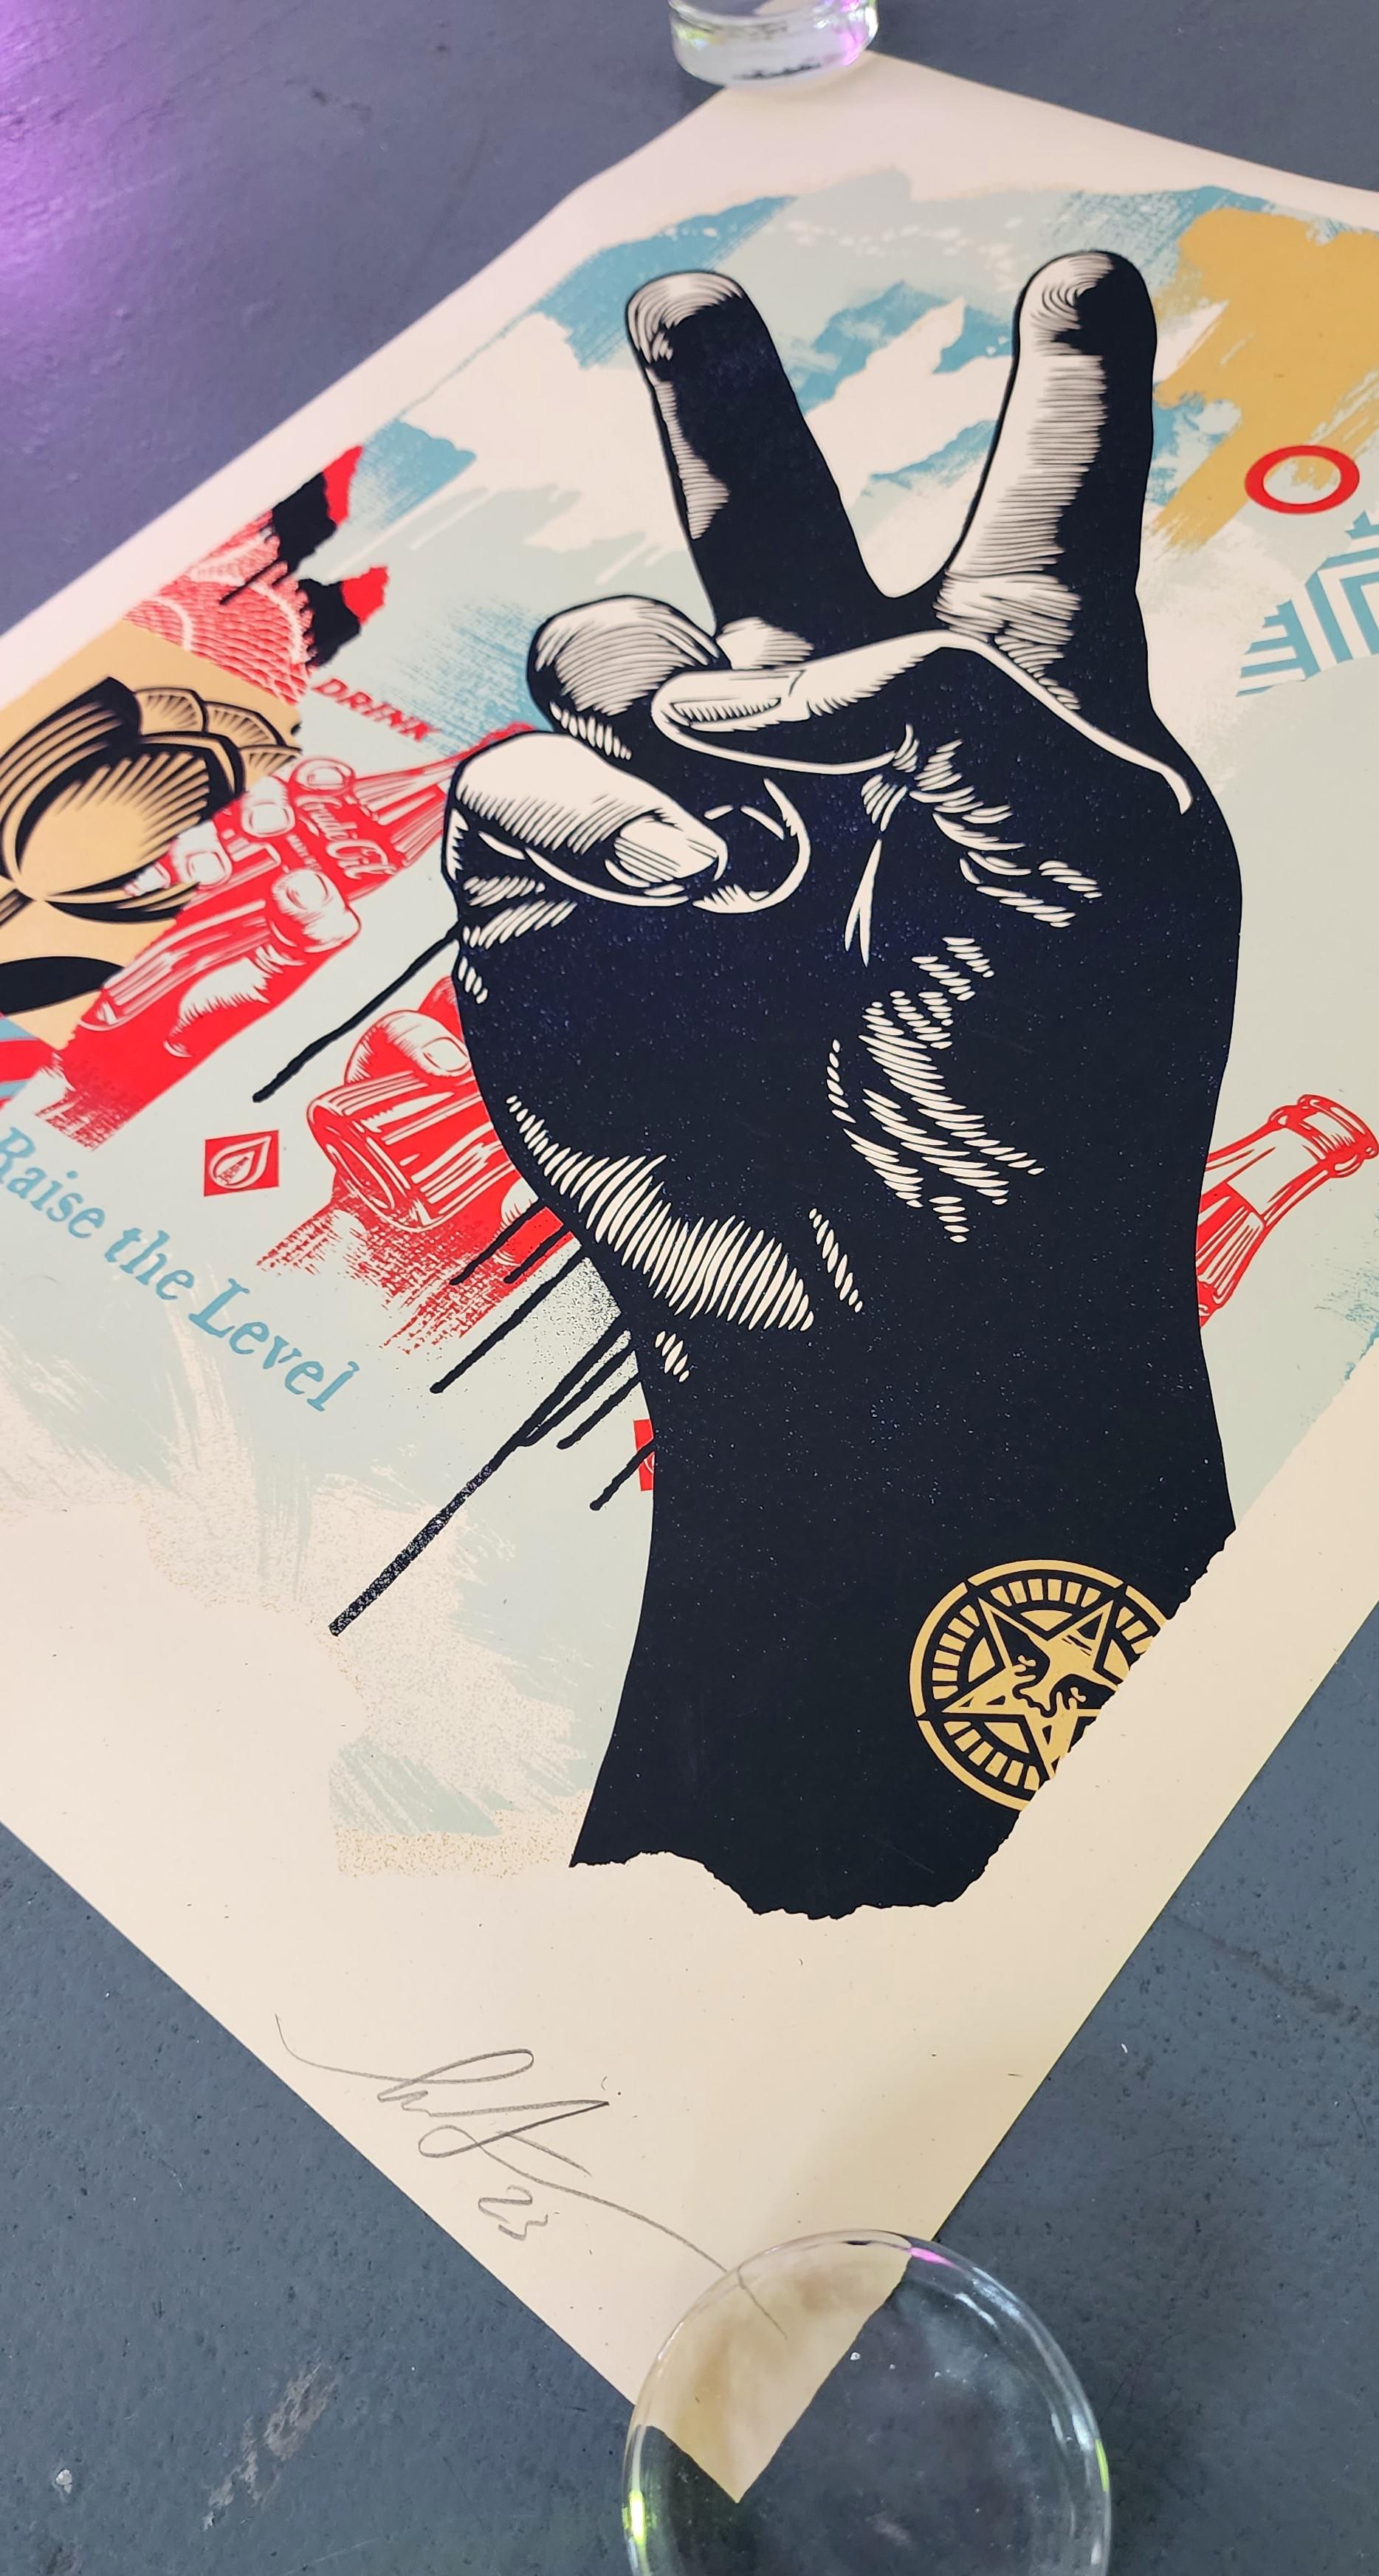 Shepard Fairey
Raise the Level (Peace) (Harmony, Straat Museum, Painterly, Diplomacy over Conflict)
Screenprint on thick cream Speckletone paper
Year: 2023
Size: 18x24 inches
Edition: 550
Signed, dated and numbered by hand 
COA provided
Ref.: